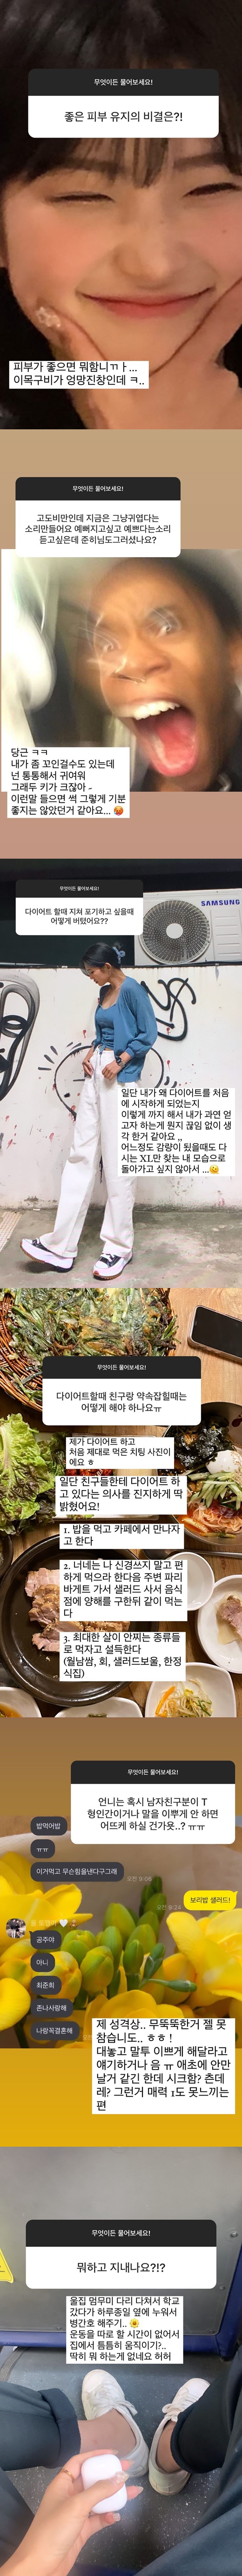 Actor Choi Jin-sils daughter Choi Joon-Hee showed off her hot-tempered gesture.Choi Joon-Hee answered fans questions through his Instagram story on the 27th.What do you do if you have good skin ... your features are messy, he said, asking, What is the secret to good skin maintenance?Youre so beautiful,but its nature,right? My best. Im stuffed with your eyes. I love you. Its not nature.I have cut off all the hooks, he said.In particular, Choi Joon-Hee unveiled a mobile messenger conversation capture shot with a non-entertainer-related boyfriend, and boasted his love affair.Choi Joon-Hee boyfriend affectionately calls Choi Joon-Hee Princess and says No, I love Choi Joon-Hee.Im married, he said, proposing with a lot of energy.Choi Joon-Hee said, What if your boyfriend does not make your horse beautiful? I can not stand the bluntest thing in my personality.I do not think I will talk to you to make you beautiful or meet you in the first place. Silent? Dere? I do not feel that charm. Choi Joon-Hee also said, I am obese and now I just hear that it is cute. I want to be pretty and I want to hear that it is pretty.I may have been twisted a little, but you are cute because you are plump, but you are tall. I do not think it was so good to hear this. How did you endure when you wanted to give up when you were tired? I think I constantly thought about why I started dieting at the beginning and what I wanted to get.I do not want to go back to my XL only again when I have lost some weight. In addition, Choi Joon-Hee said, My house is hurt by my legs and I go to school and lie down next to me all day. I do not have time to exercise separately.I dont have anything to do, Huh.Meanwhile, Choi Joon-Hee recently announced the signing of an exclusive contract with entertainment agency Wybloom.